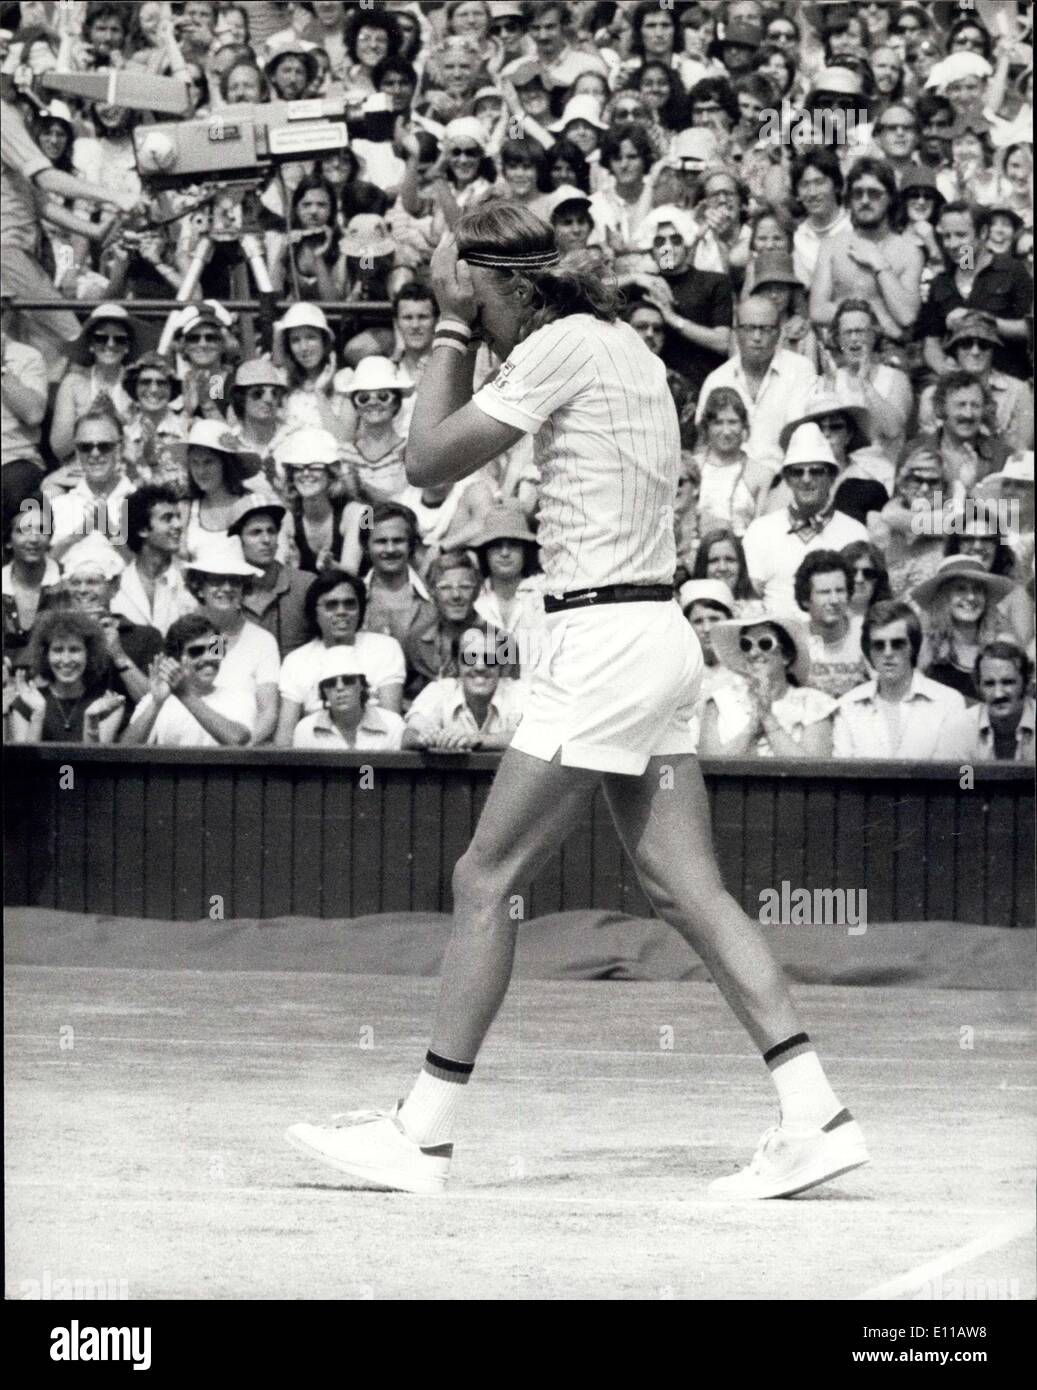 Jul. 03, 1976 - Bjorn Borg Of Sweden Is The 1976 Wimbledon Singles Champion: This afternoon on the centre court, at Wimbledon Bjorn of Sweden won the Men's Singles title when beating L Nastase of Rumania 6-4 6-2 9-7. Photo shows Bjorn Borg holds his head after winning the men's singles title at Wimbledon today. Stock Photo